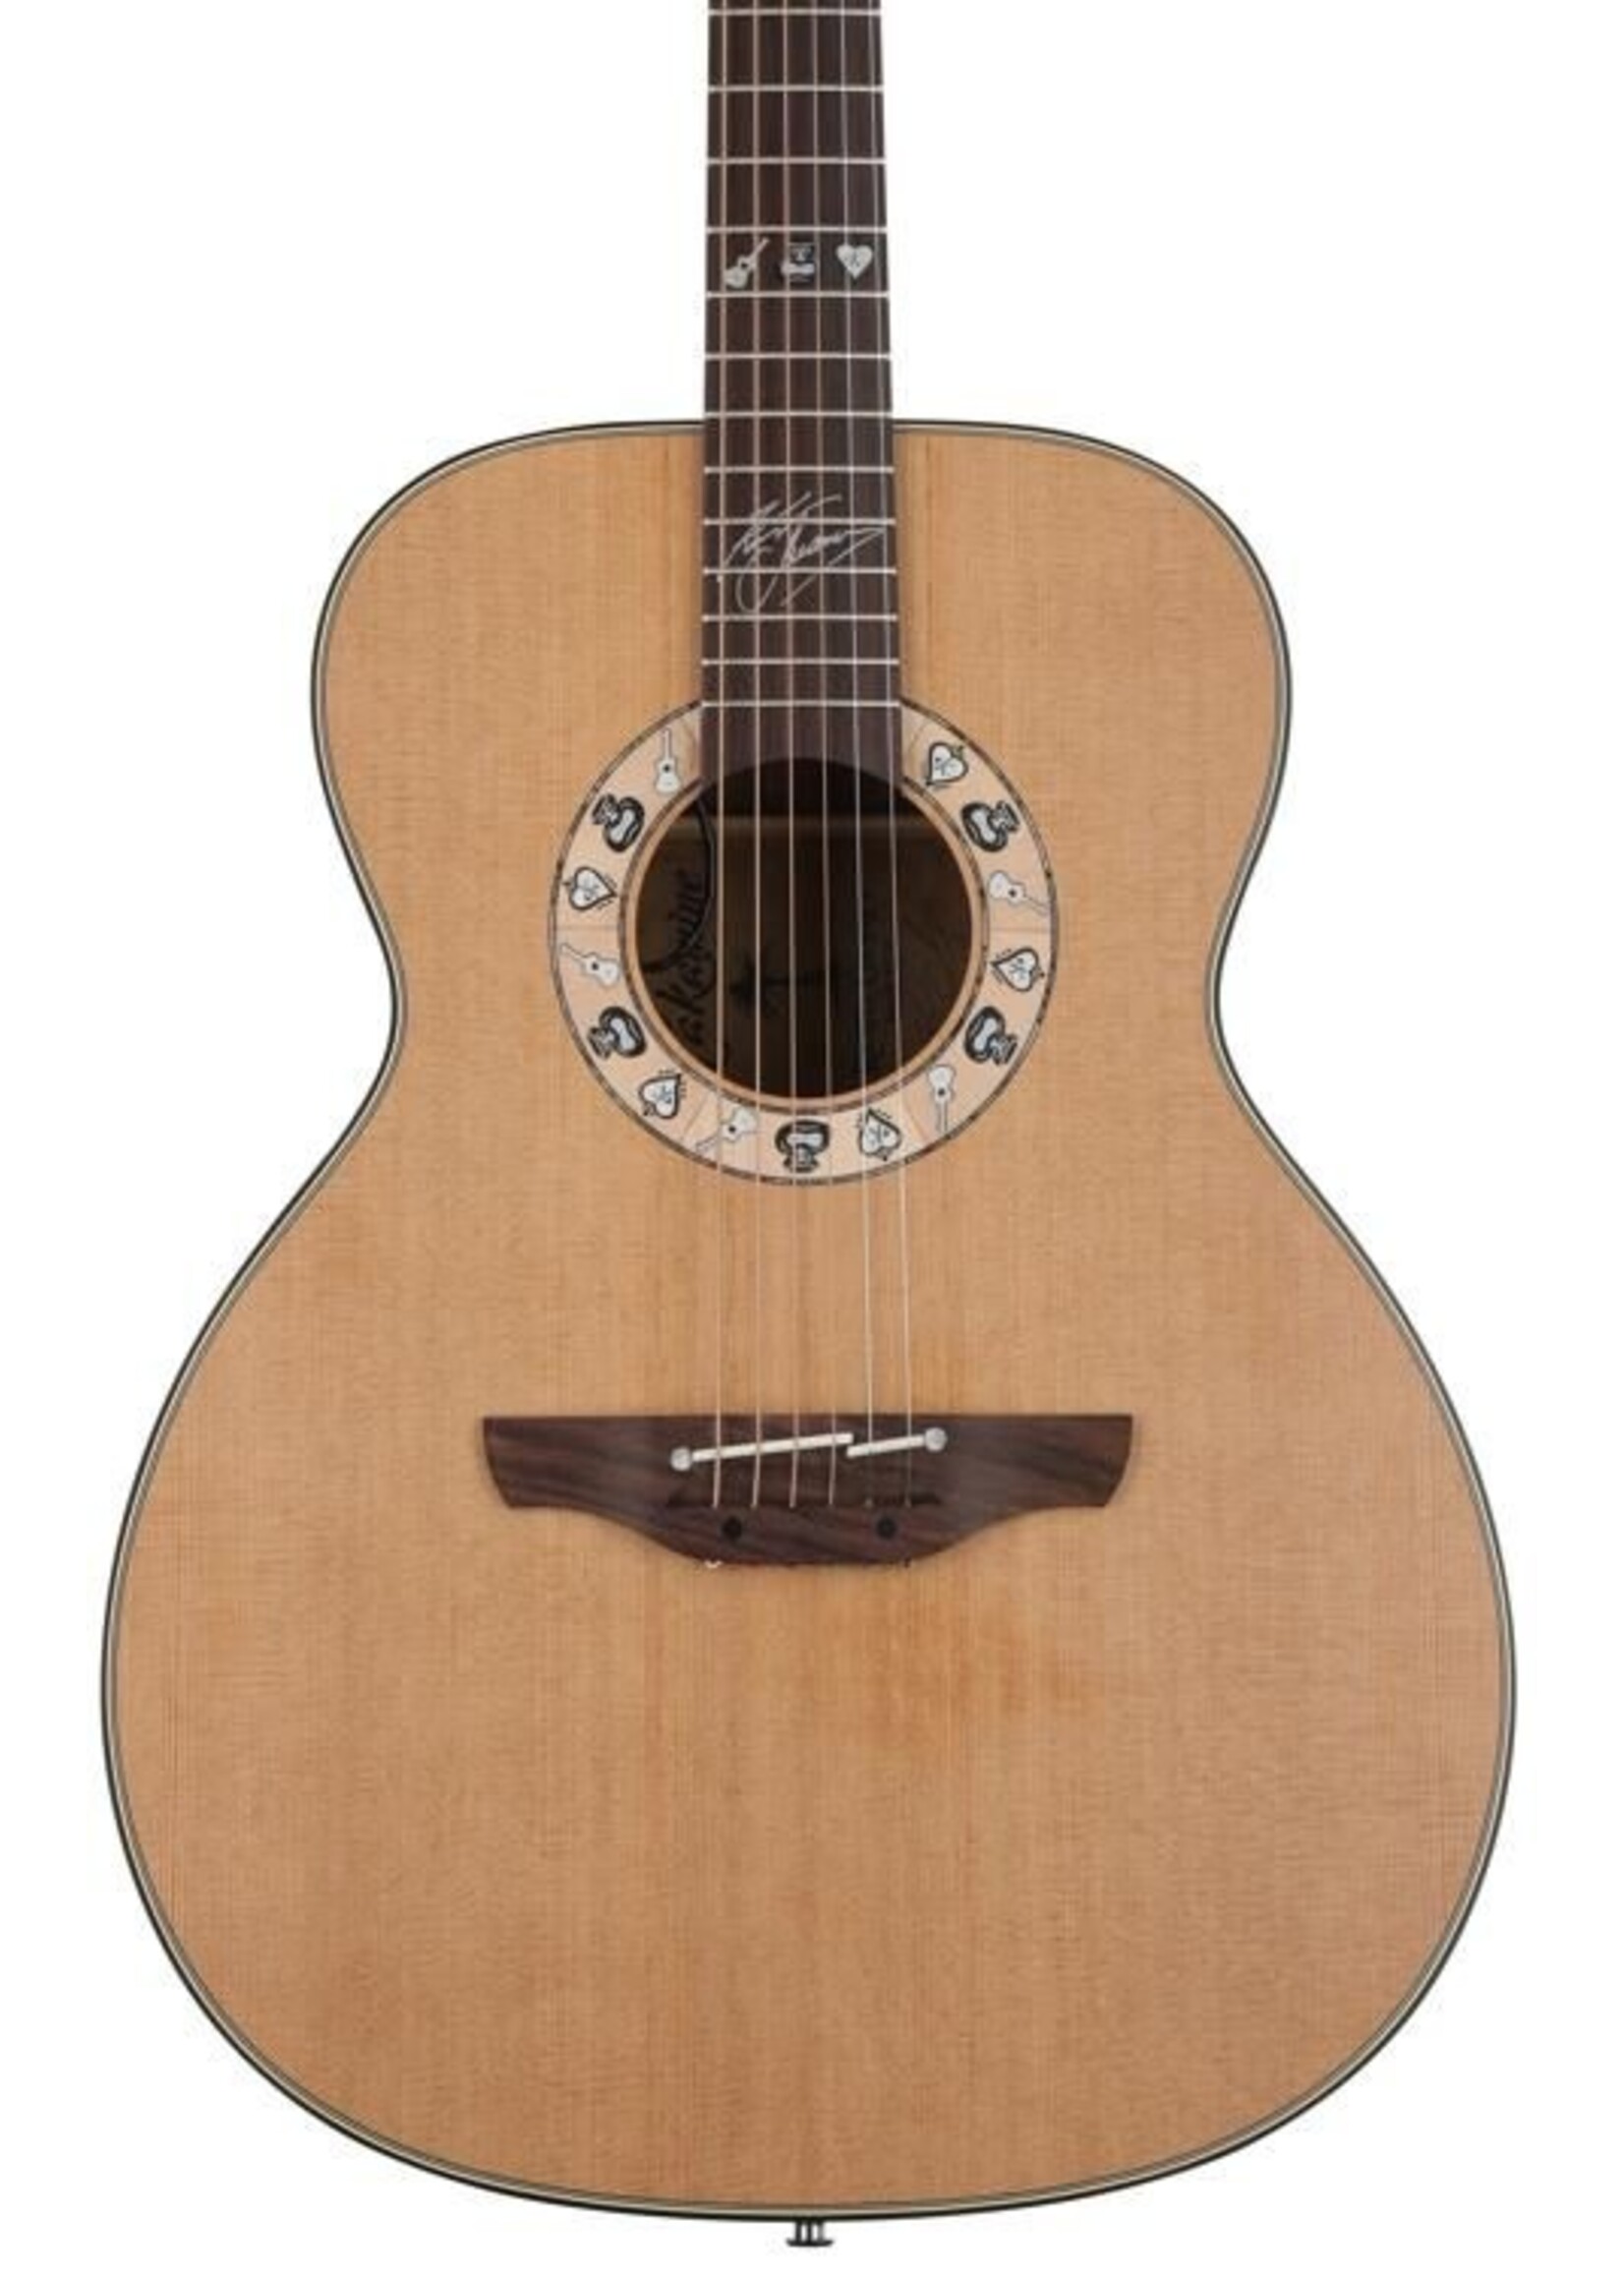 Takamine Takamine Kenny Chesney Signature Acoustic-Electric Guitar - Natural